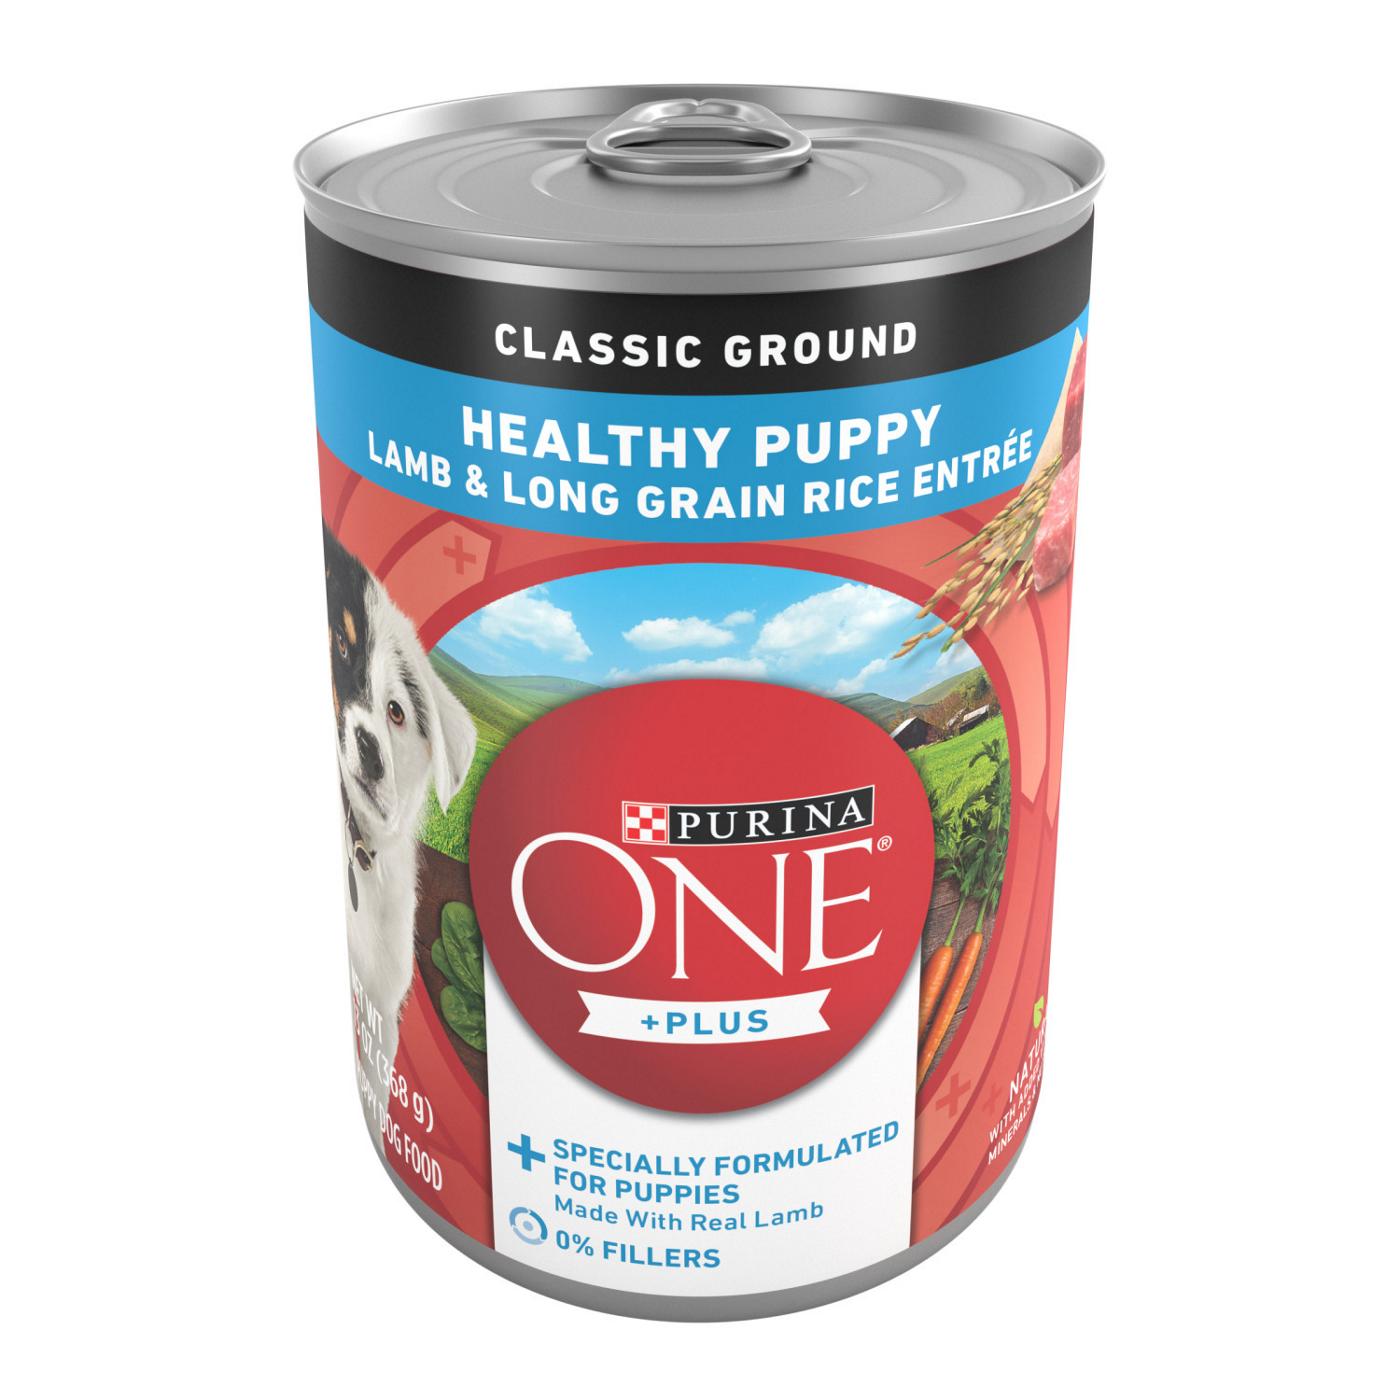 Purina ONE Purina ONE Plus Wet Puppy Food Classic Ground Healthy Puppy Lamb and Long Grain Rice Entree; image 1 of 6